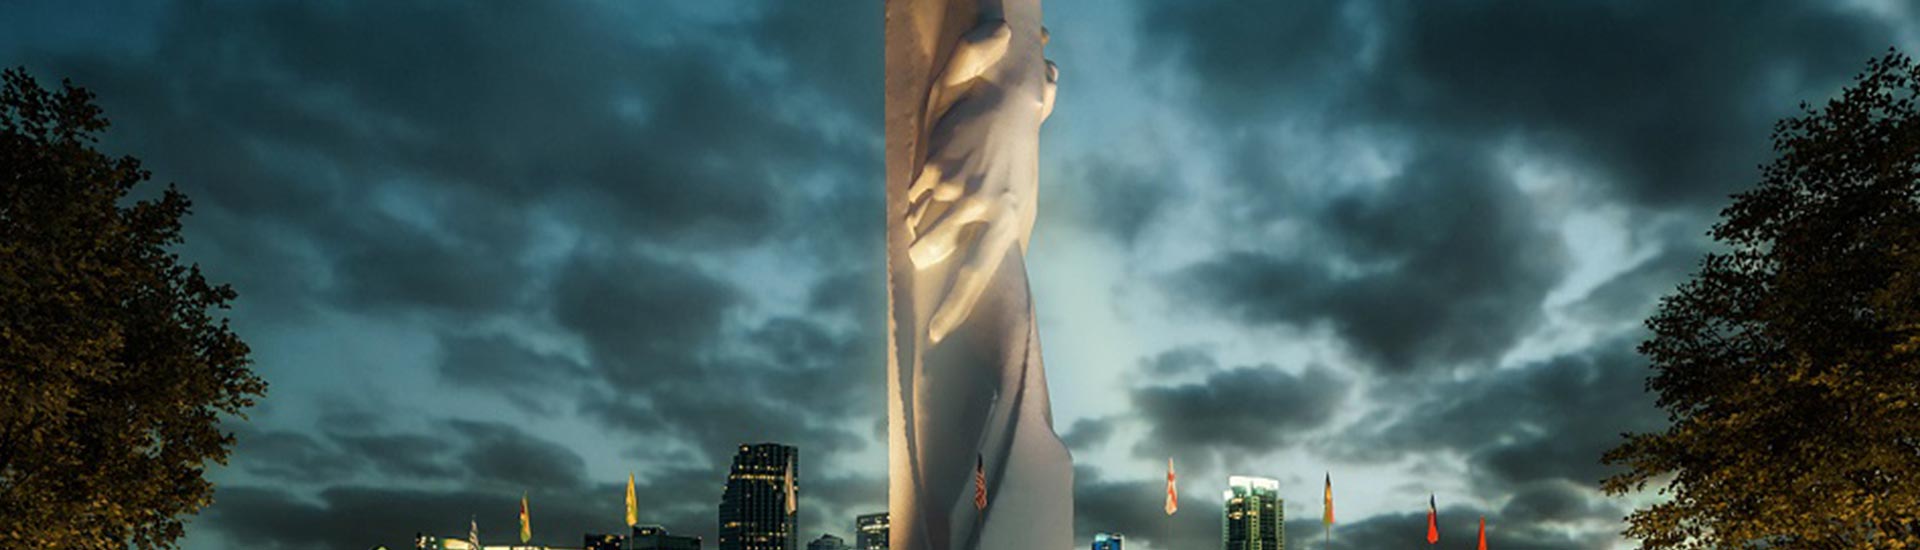 Will a massive “Statue of Responsibility” soon grace the San Diego skyline?